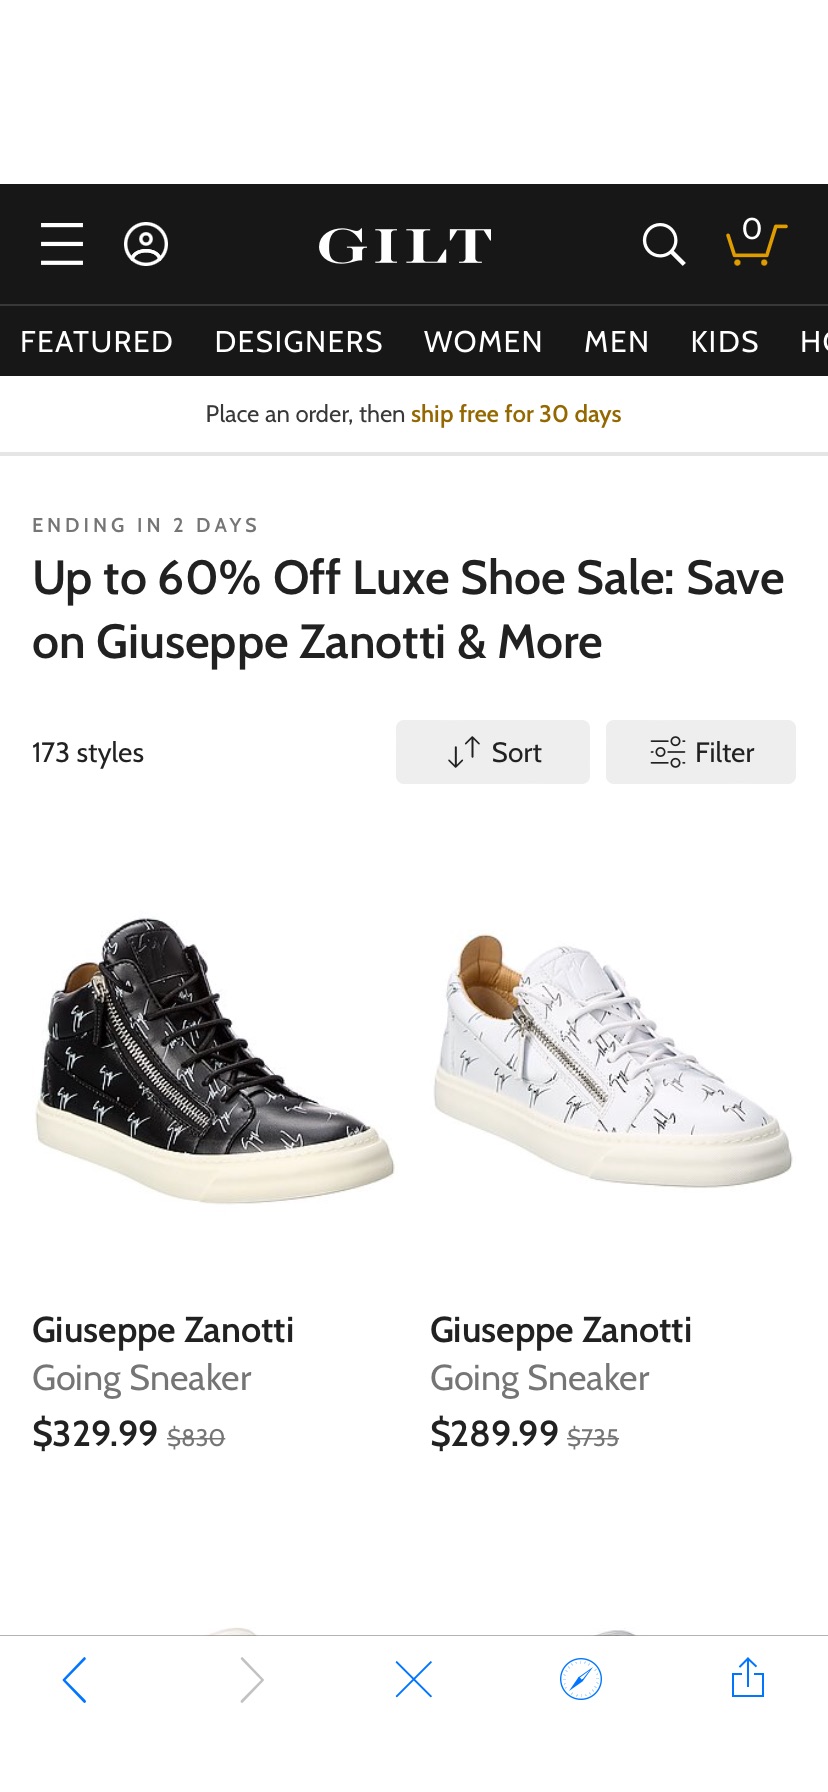 Up to 60% Off Luxe Shoe Sale: Save on Giuseppe Zanotti & More / Gilt